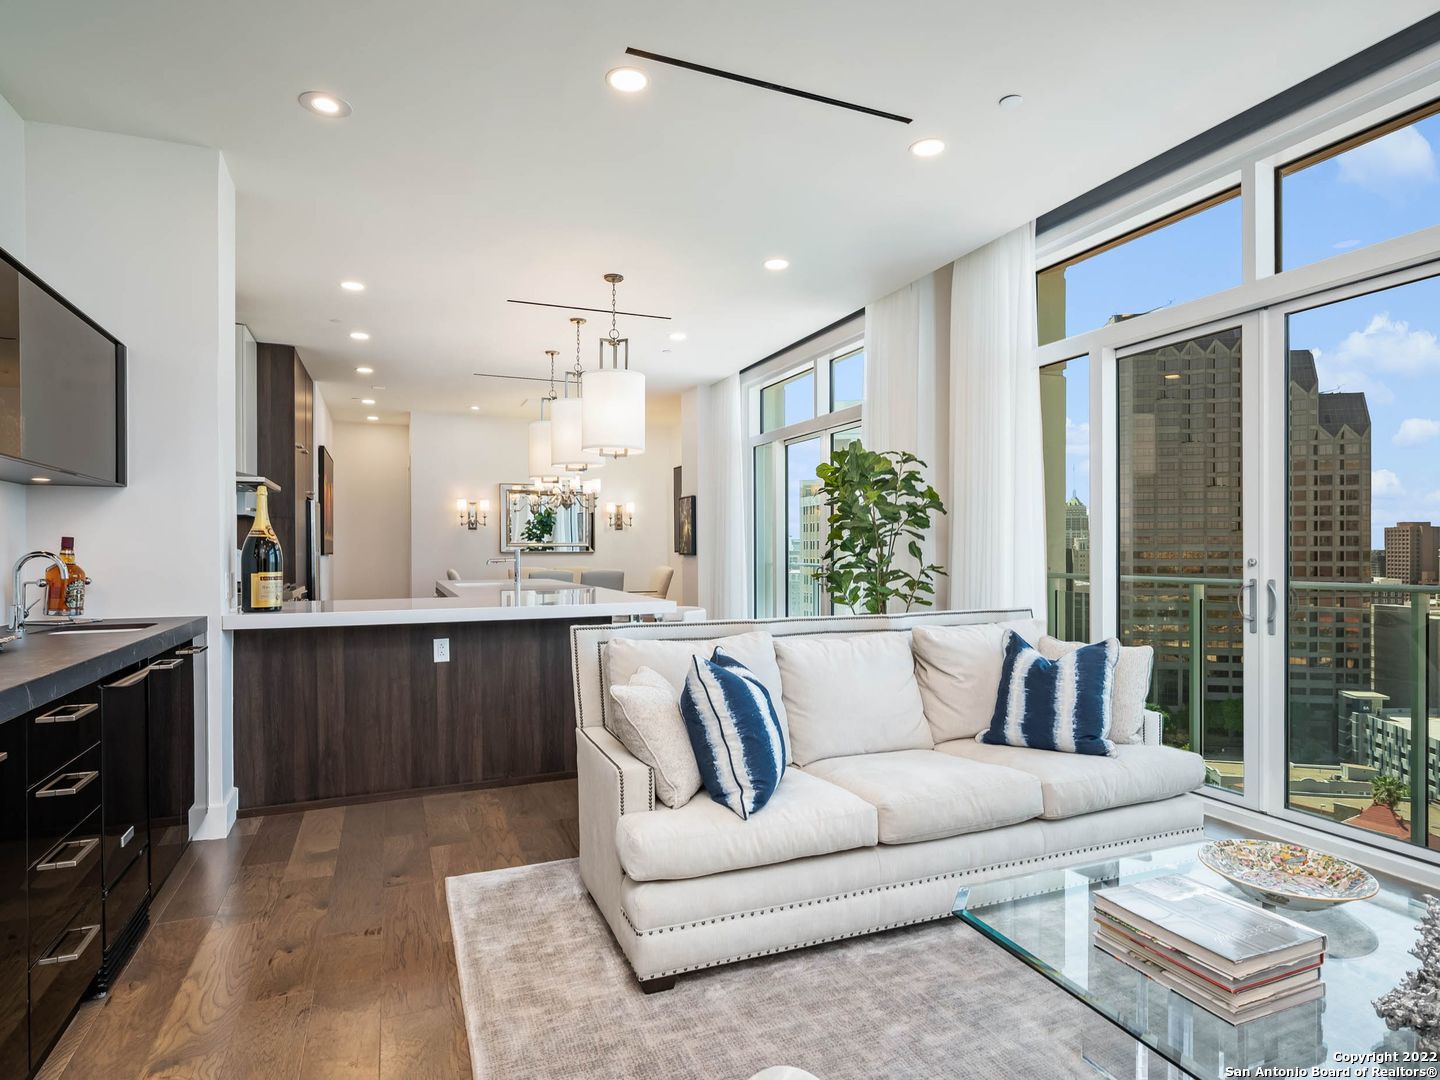 This customized residence has phenomenal downtown views through the floor-to-ceiling glass with sliding doors. With 10 ft ceilings, this 2 BD | 2.5 BA | 1,694 SF Cezanne floor plan is loaded with upgrades. The space is inviting and ready to host, with a wet bar, wine refrigerator and ice maker in the living room bar. The chef's kitchen has a grand island with thick quartz countertops, a pullout pantry, high-end Thermador gas stove, and to-the-ceiling cabinetry with upgraded hardware. Custom finishes include light fixtures, motorized shades, and curtains. The owner's suite has great views and customized closets. This residence is being offered furnished, if desired. Located above the Thompson Hotel, amenities like 24-hour concierge, valet parking, and optional housekeeping and linen service offer a low-maintenance lifestyle. Residents have full access to the Thompson pool with cabanas, bar, and cafe. The hotel spa has a steam room and sauna and offers in-home massages. Other services available include dog walking, car detailing, personal shopping, housekeeping, linen service, and dry cleaning. While LandRace offers riverside seating downstairs, The Moon's Daughters has rooftop dining and cocktails upstairs. Located on a quiet part of the river next to The Tobin Center for the Performing Arts, residents enjoy preferred access and ticket purchases to all shows at The Tobin. Come experience The Art of Living Beautifully.